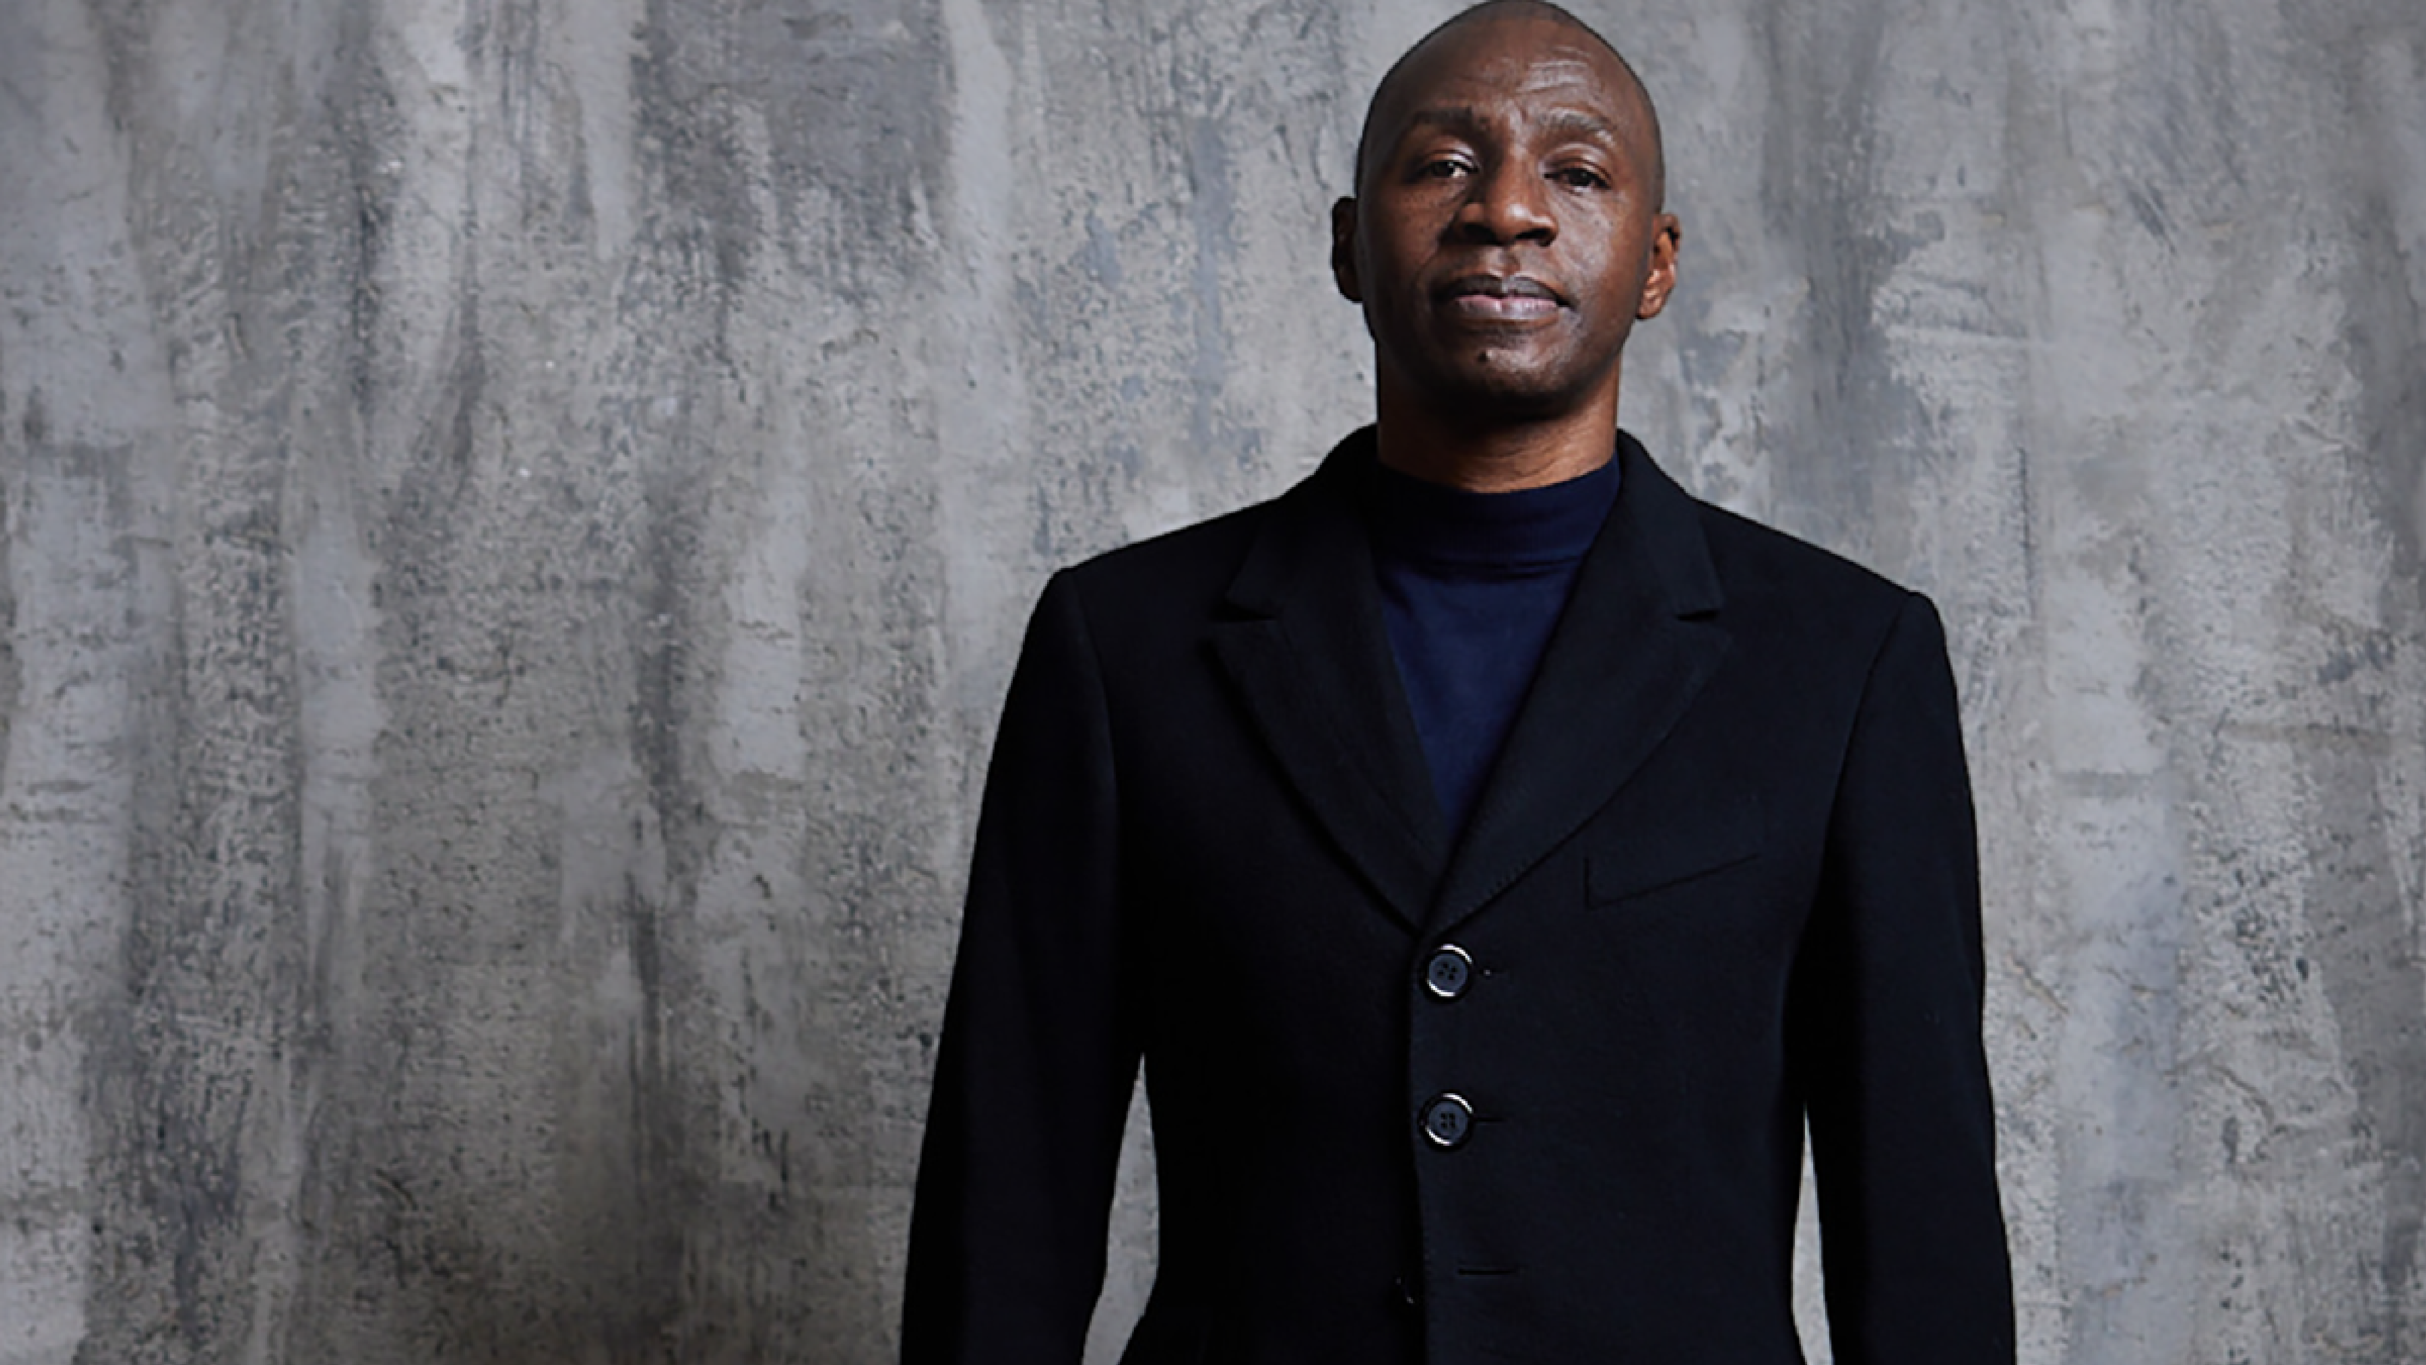 Tunde - The Voice of Lighthouse Family in Leeds promo photo for Ticketmaster presale offer code